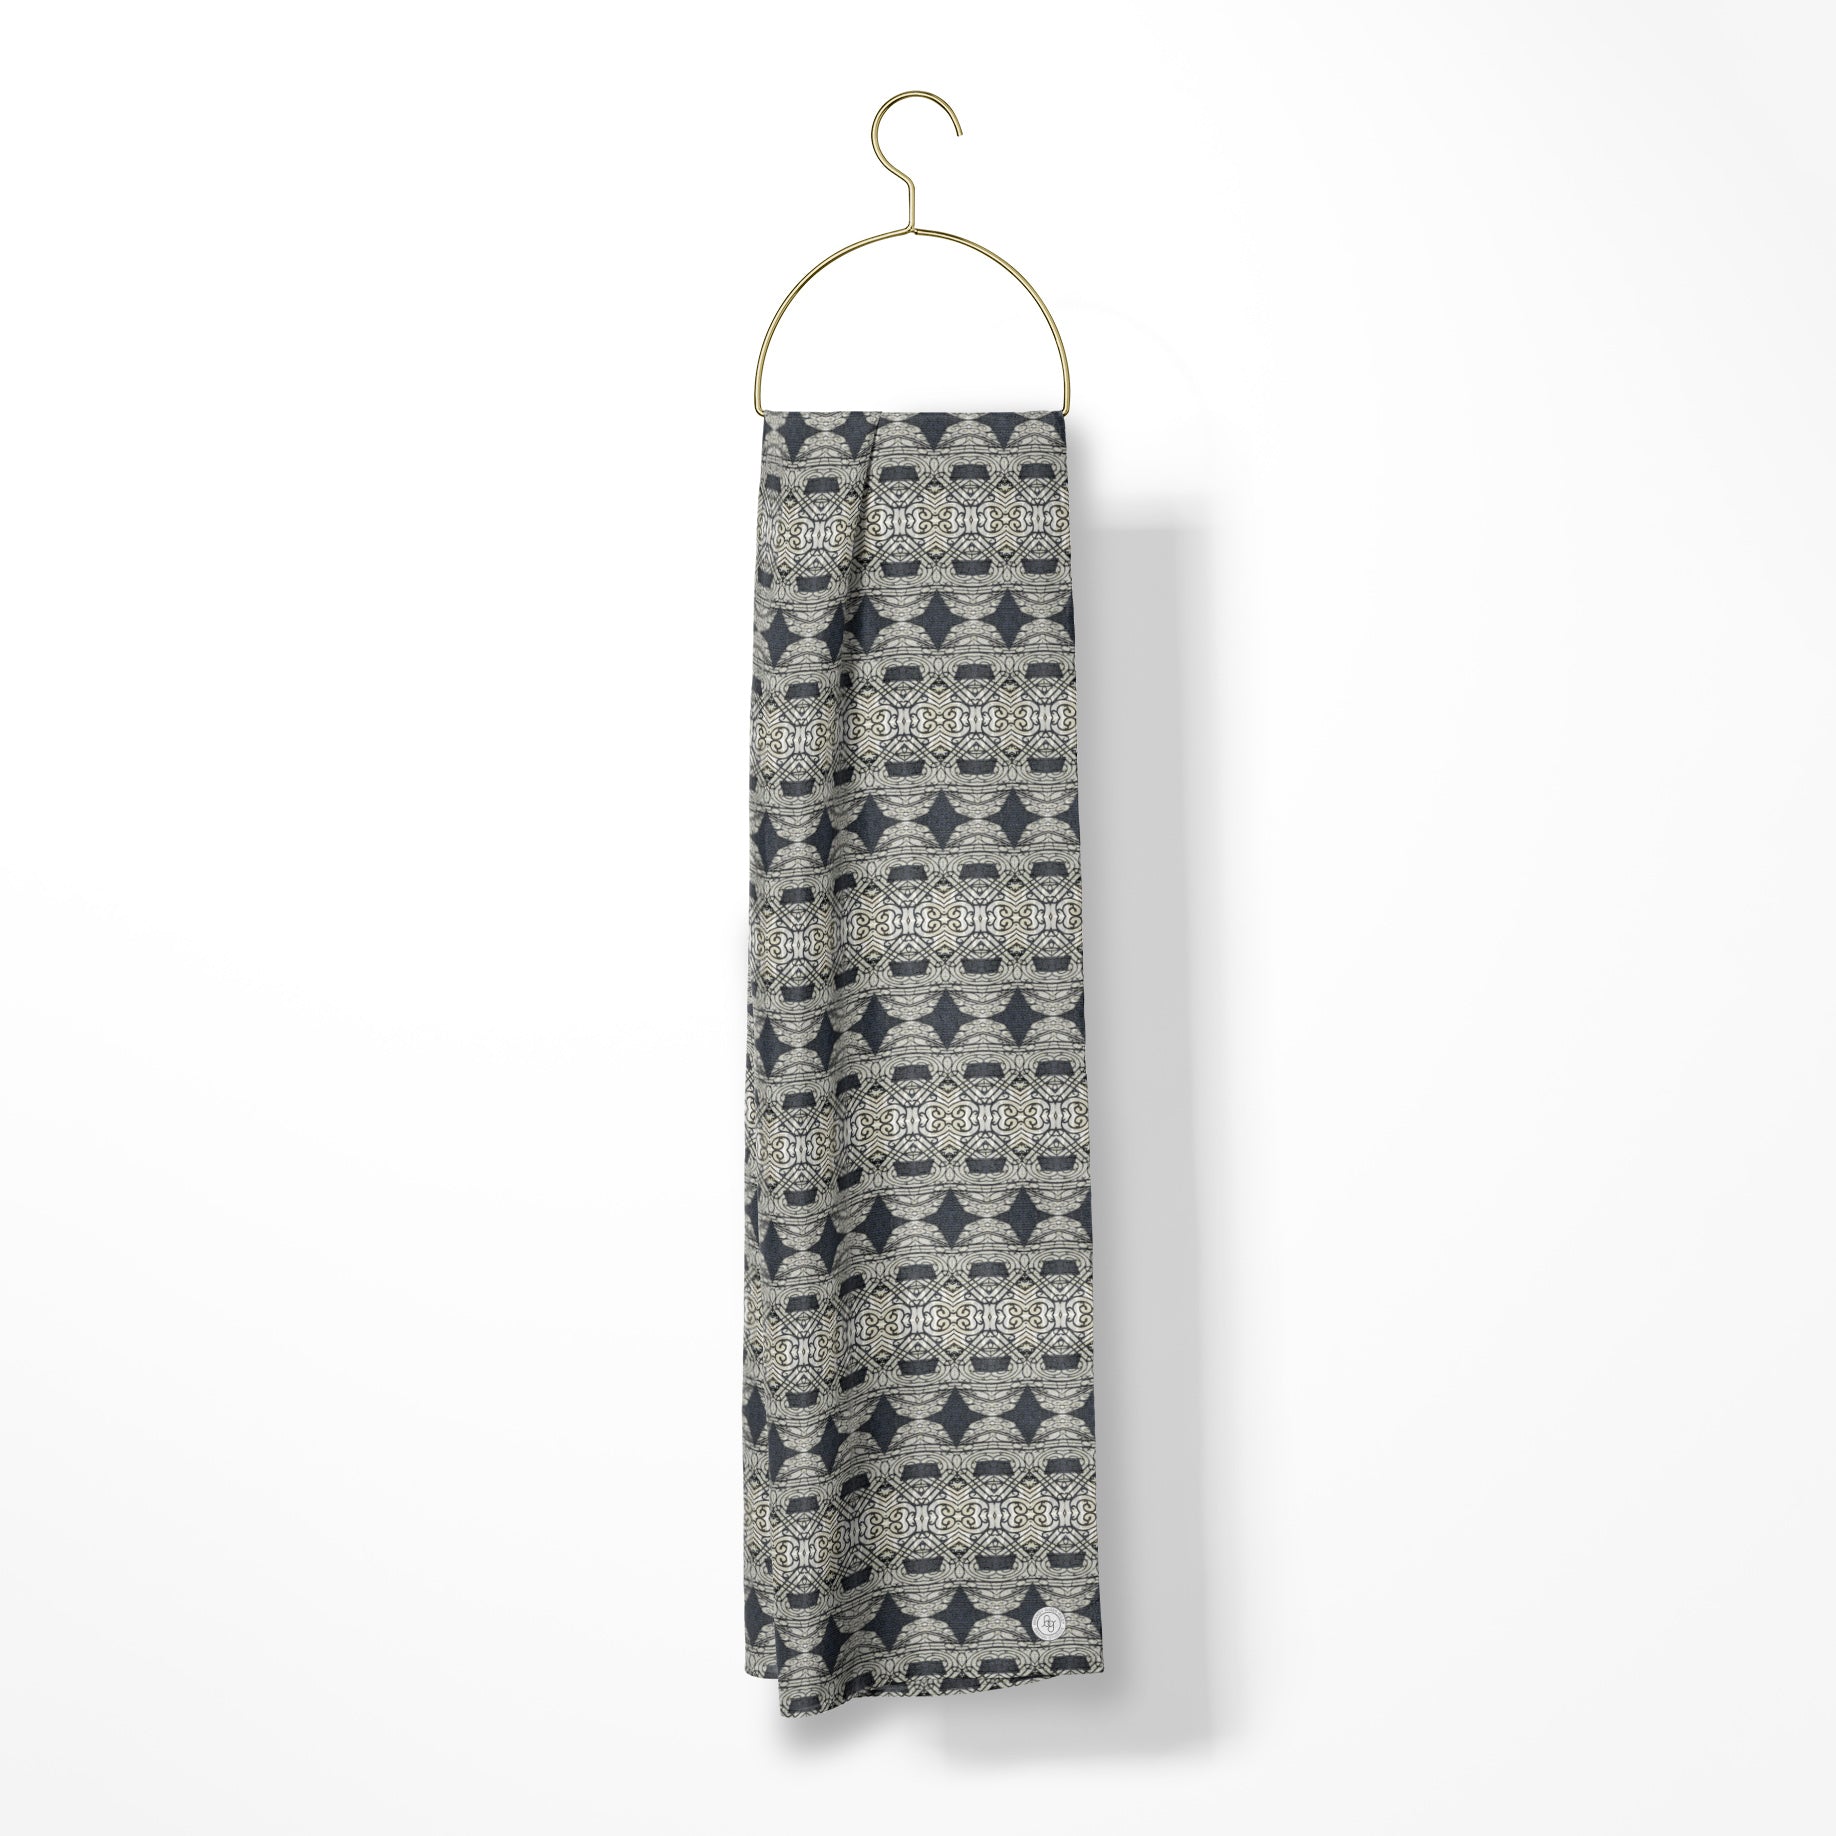 Oblong silk scarf featuring a charcoal gray abstract pattern, draped over a gold hanger